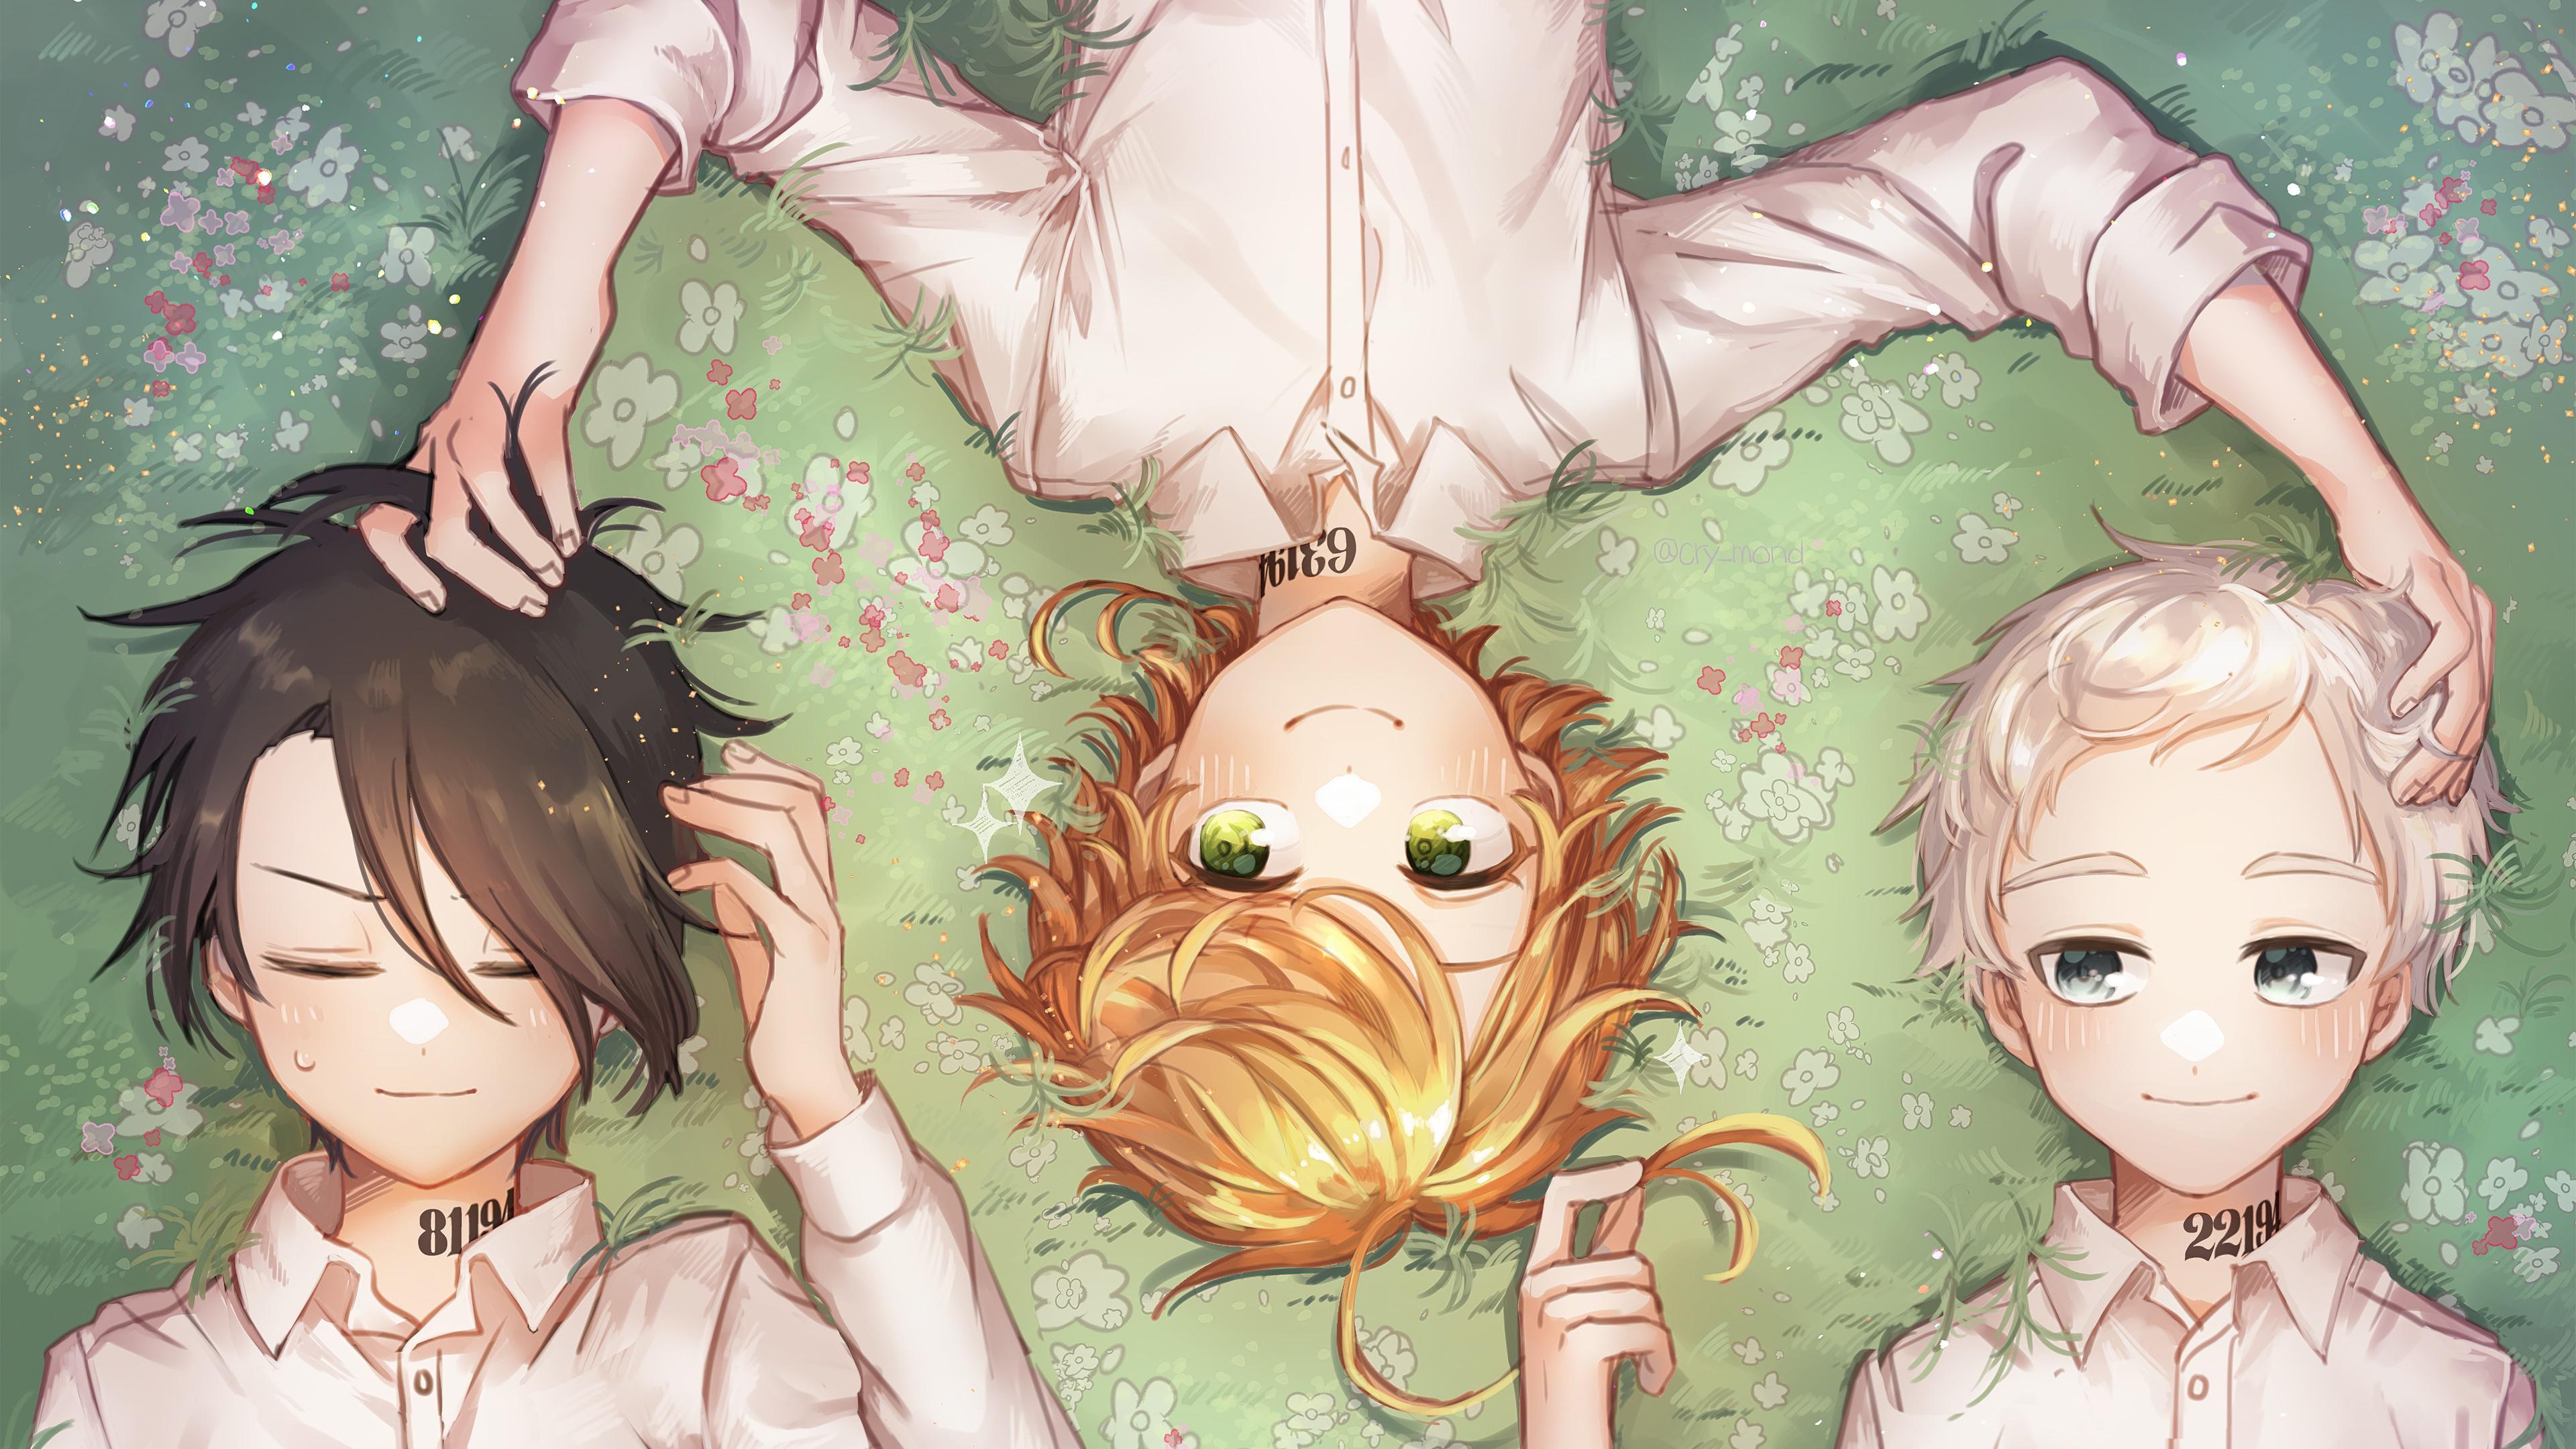 HD wallpaper, Norman, Ray, Wallpaper, 4K, Hd, Emma, The Promised Neverland